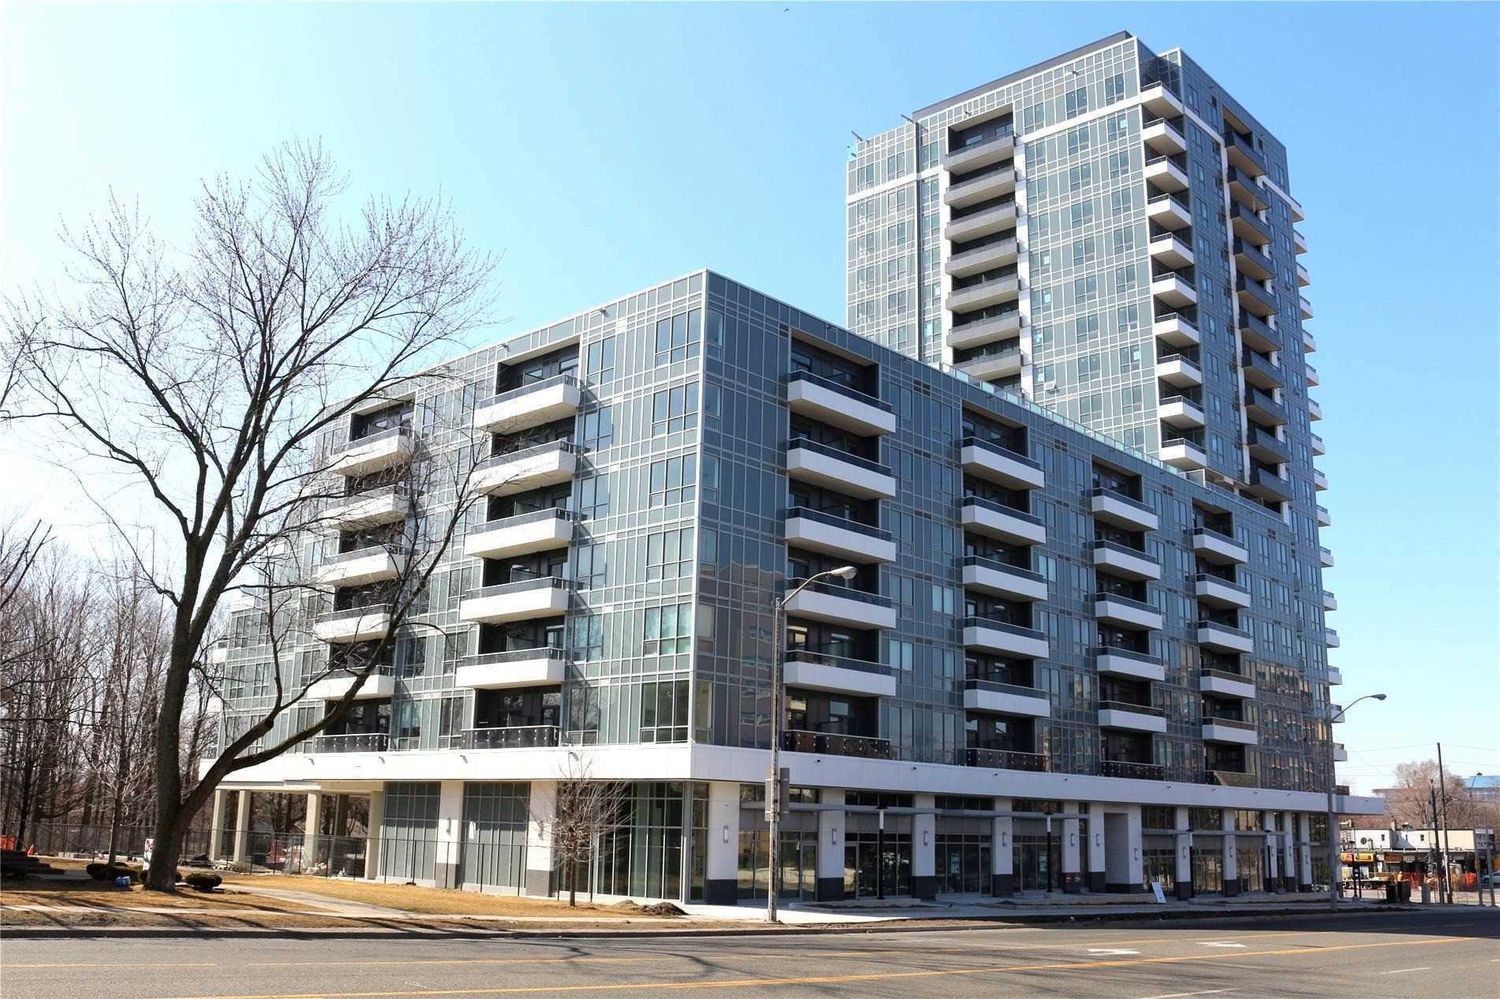 3121 Sheppard Avenue E. Wish Condos is located in  Scarborough, Toronto - image #1 of 3